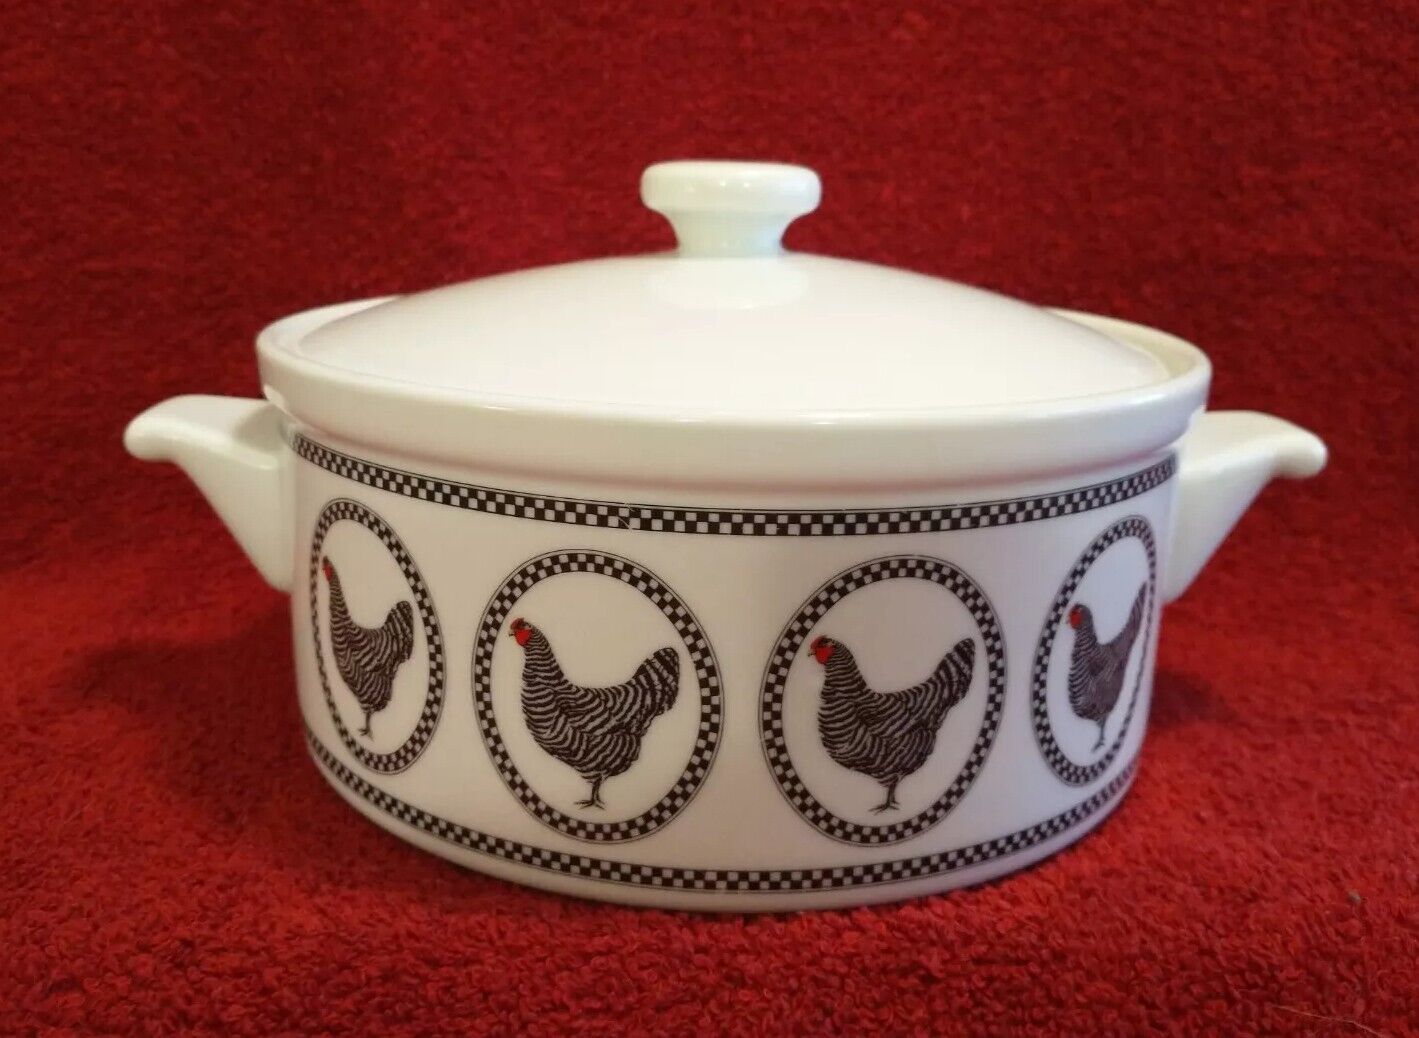 Vintage Dept 56 FRENCH HENS Checkered Casserole Serving Dish with Lid